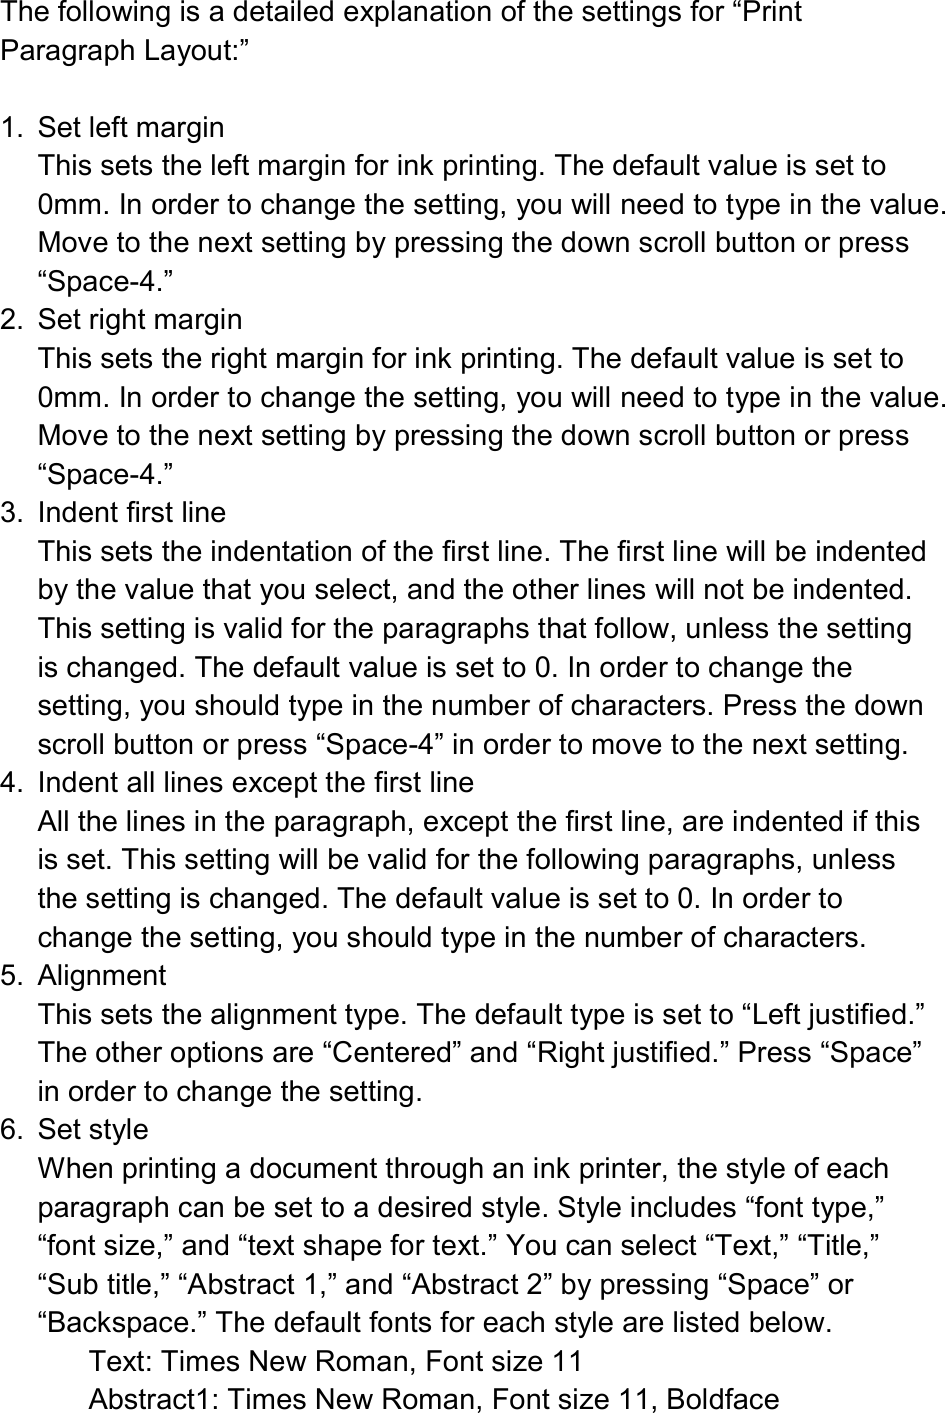  The following is a detailed explanation of the settings for “Print Paragraph Layout:”  1.  Set left margin This sets the left margin for ink printing. The default value is set to 0mm. In order to change the setting, you will need to type in the value. Move to the next setting by pressing the down scroll button or press “Space-4.” 2.  Set right margin This sets the right margin for ink printing. The default value is set to 0mm. In order to change the setting, you will need to type in the value. Move to the next setting by pressing the down scroll button or press “Space-4.” 3.  Indent first line This sets the indentation of the first line. The first line will be indented by the value that you select, and the other lines will not be indented. This setting is valid for the paragraphs that follow, unless the setting is changed. The default value is set to 0. In order to change the setting, you should type in the number of characters. Press the down scroll button or press “Space-4” in order to move to the next setting. 4.  Indent all lines except the first line All the lines in the paragraph, except the first line, are indented if this is set. This setting will be valid for the following paragraphs, unless the setting is changed. The default value is set to 0. In order to change the setting, you should type in the number of characters. 5.  Alignment This sets the alignment type. The default type is set to “Left justified.” The other options are “Centered” and “Right justified.” Press “Space” in order to change the setting. 6.  Set style When printing a document through an ink printer, the style of each paragraph can be set to a desired style. Style includes “font type,” “font size,” and “text shape for text.” You can select “Text,” “Title,” “Sub title,” “Abstract 1,” and “Abstract 2” by pressing “Space” or “Backspace.” The default fonts for each style are listed below. Text: Times New Roman, Font size 11 Abstract1: Times New Roman, Font size 11, Boldface   